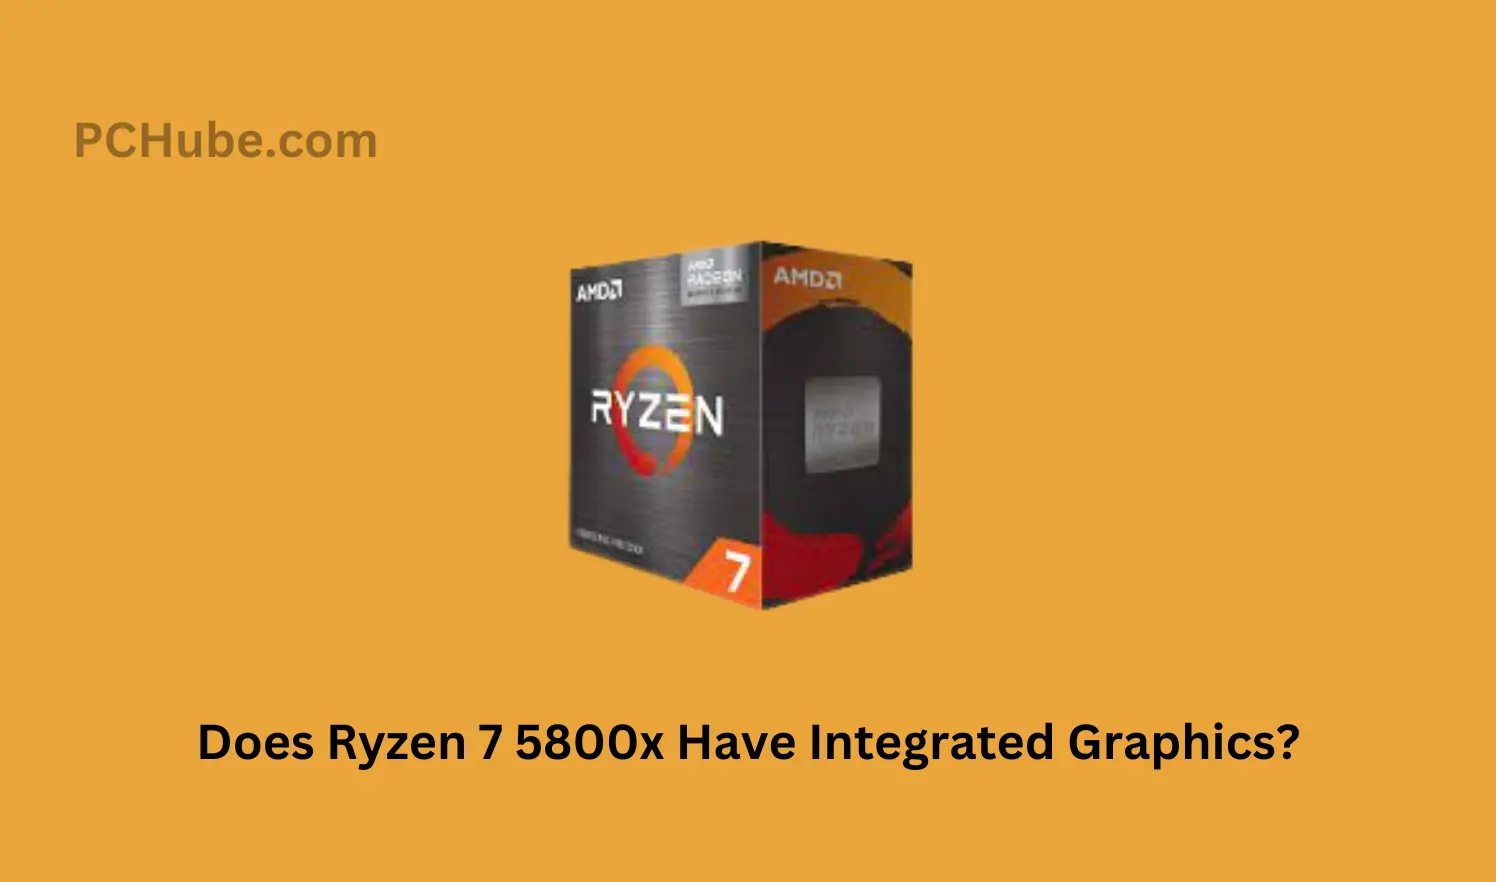 Does Ryzen 7 5800x Have Integrated Graphics?